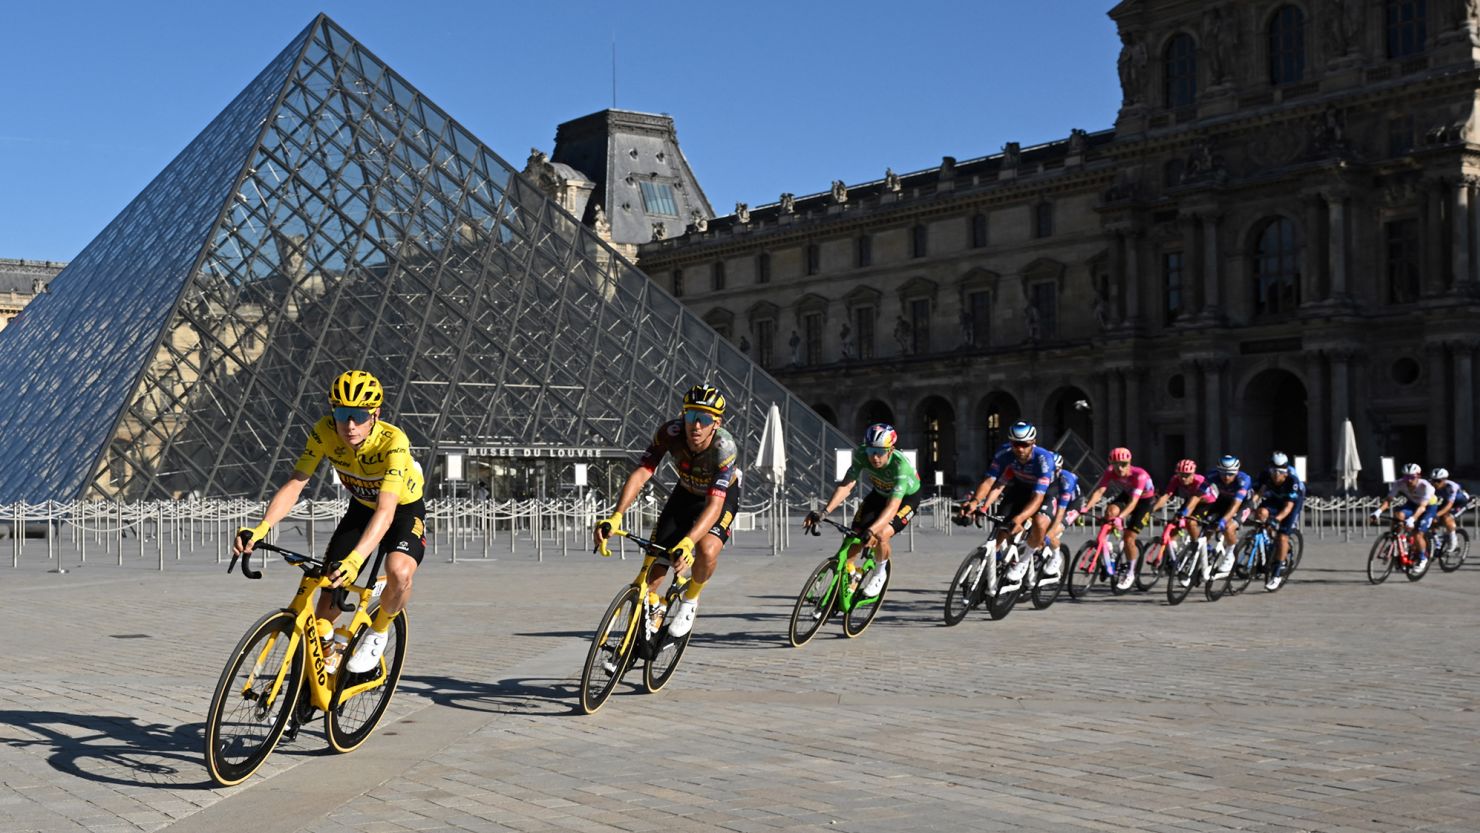 Cycling - Tour de France - Stage 21 - Paris La Defense Arena to Champs-Elysees - France - July 24, 2022
General view of Jumbo - Visma's Jonas Vingegaard in action with riders passing the Louvre museum during stage 21 Pool via REUTERS/Bertrand Guay